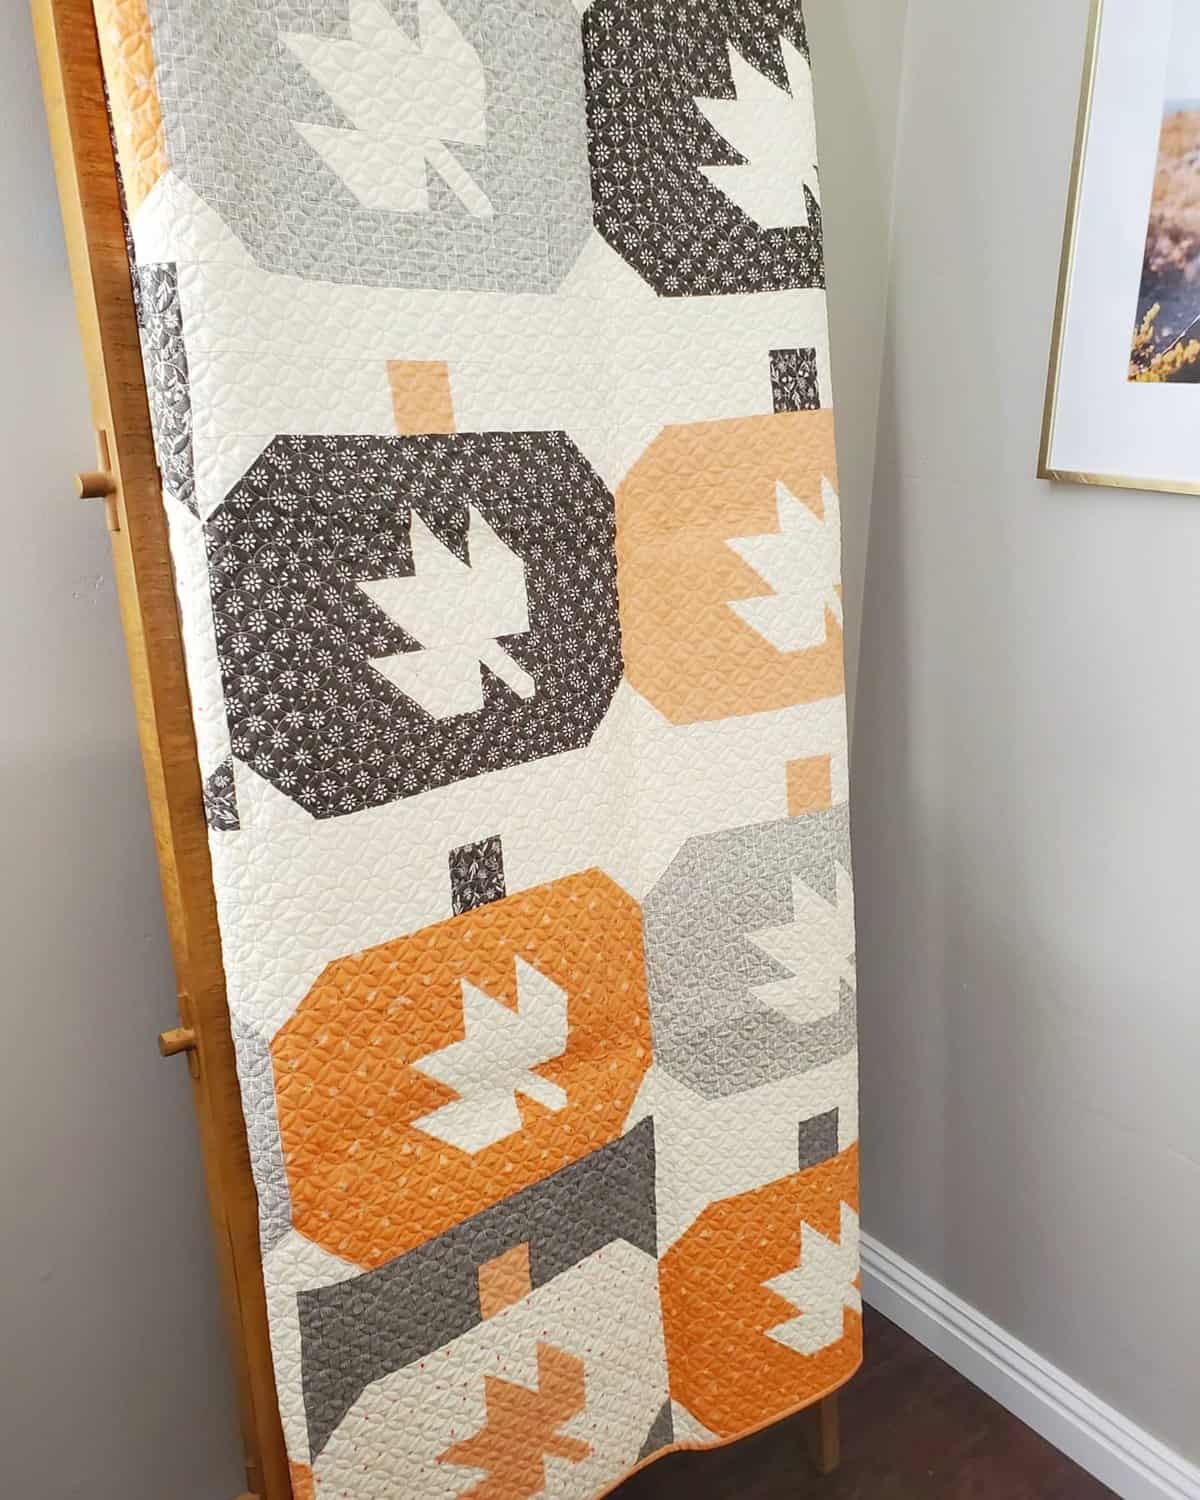 How to Decorate Your Home with Fall Quilts featured by Top US Quilting Blog, A Quilting Life